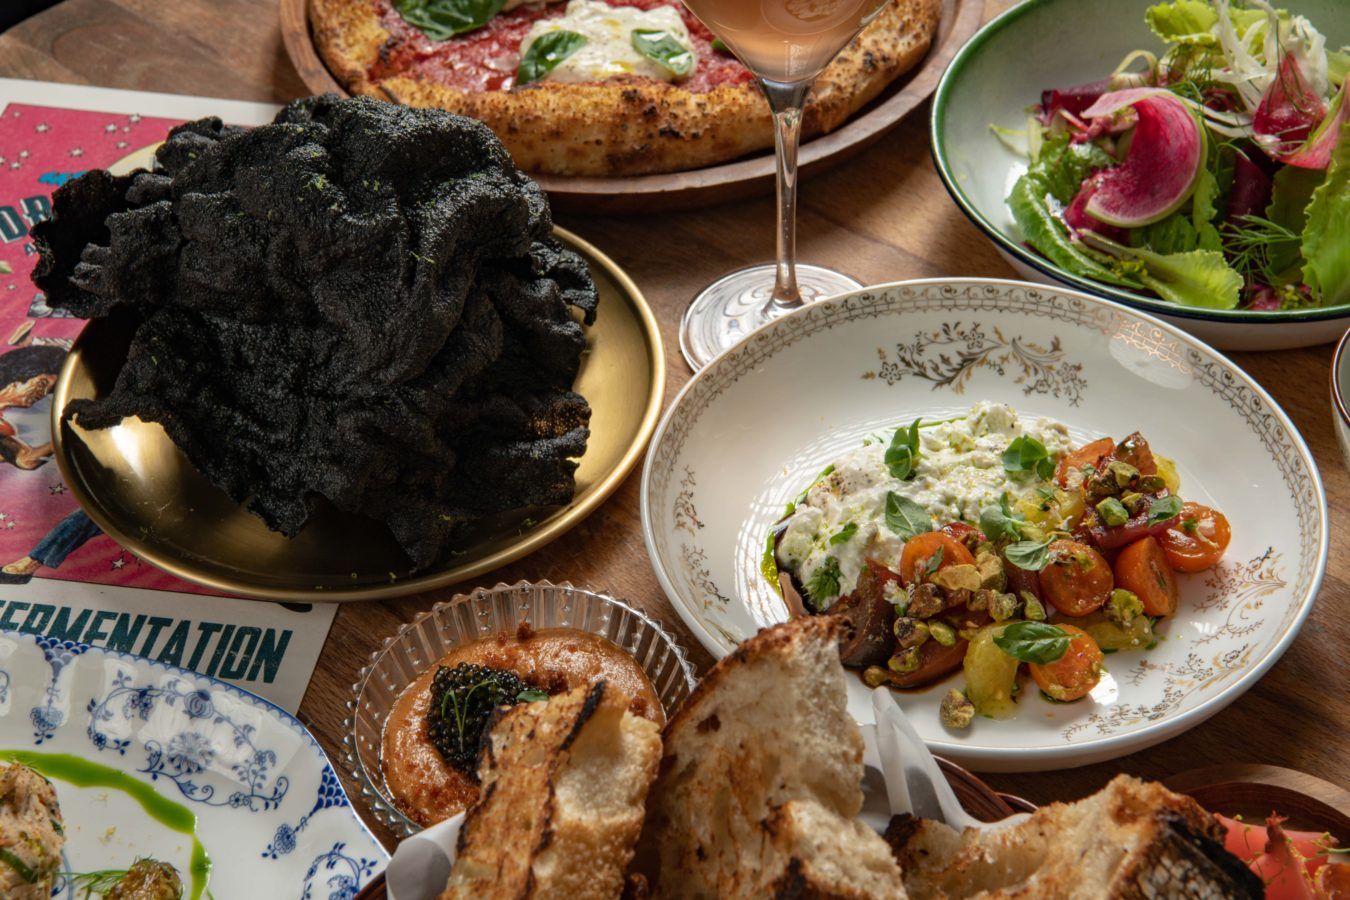 Love sourdough? You need to grab a seat at the new Drunken Farmer